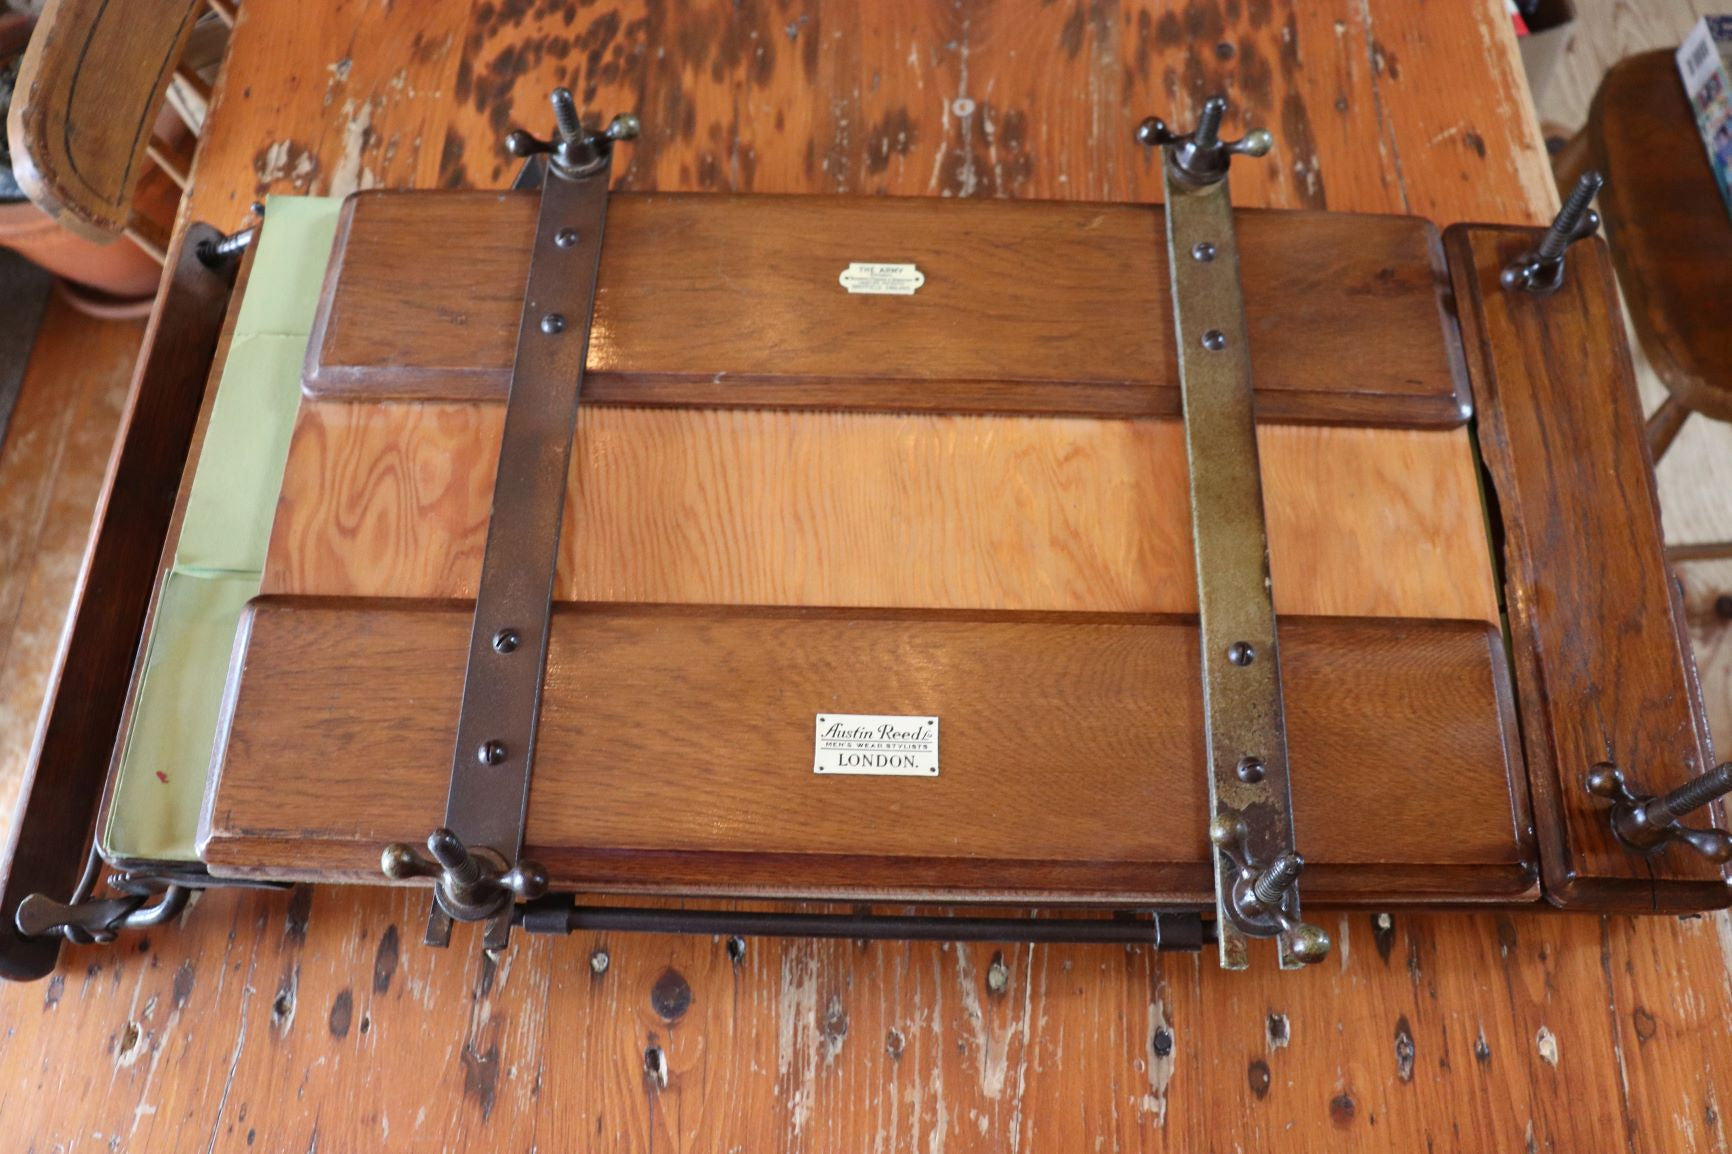 Vintage Automatic Trouser Presser and Stretcher